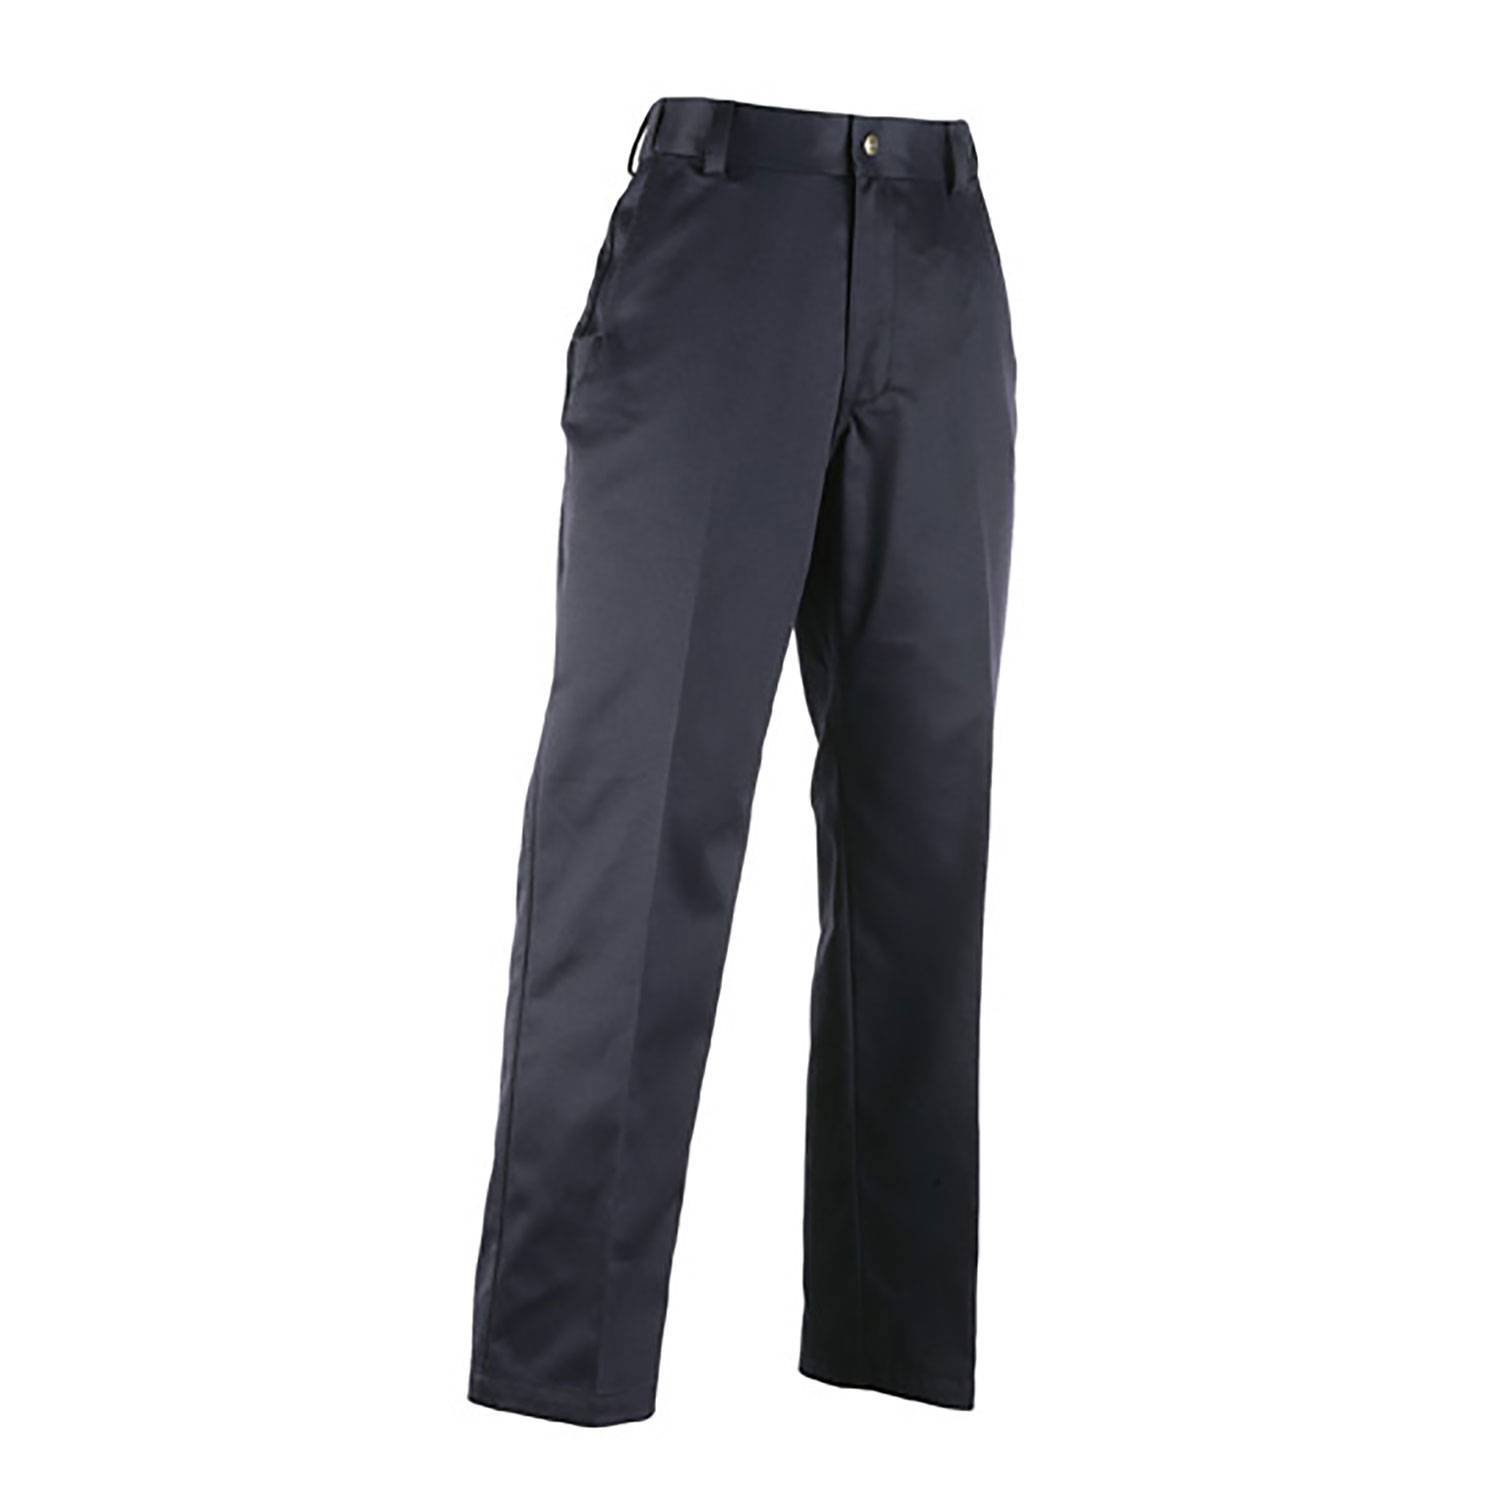 5.11 Tactical Firefighter Stationwear Pants